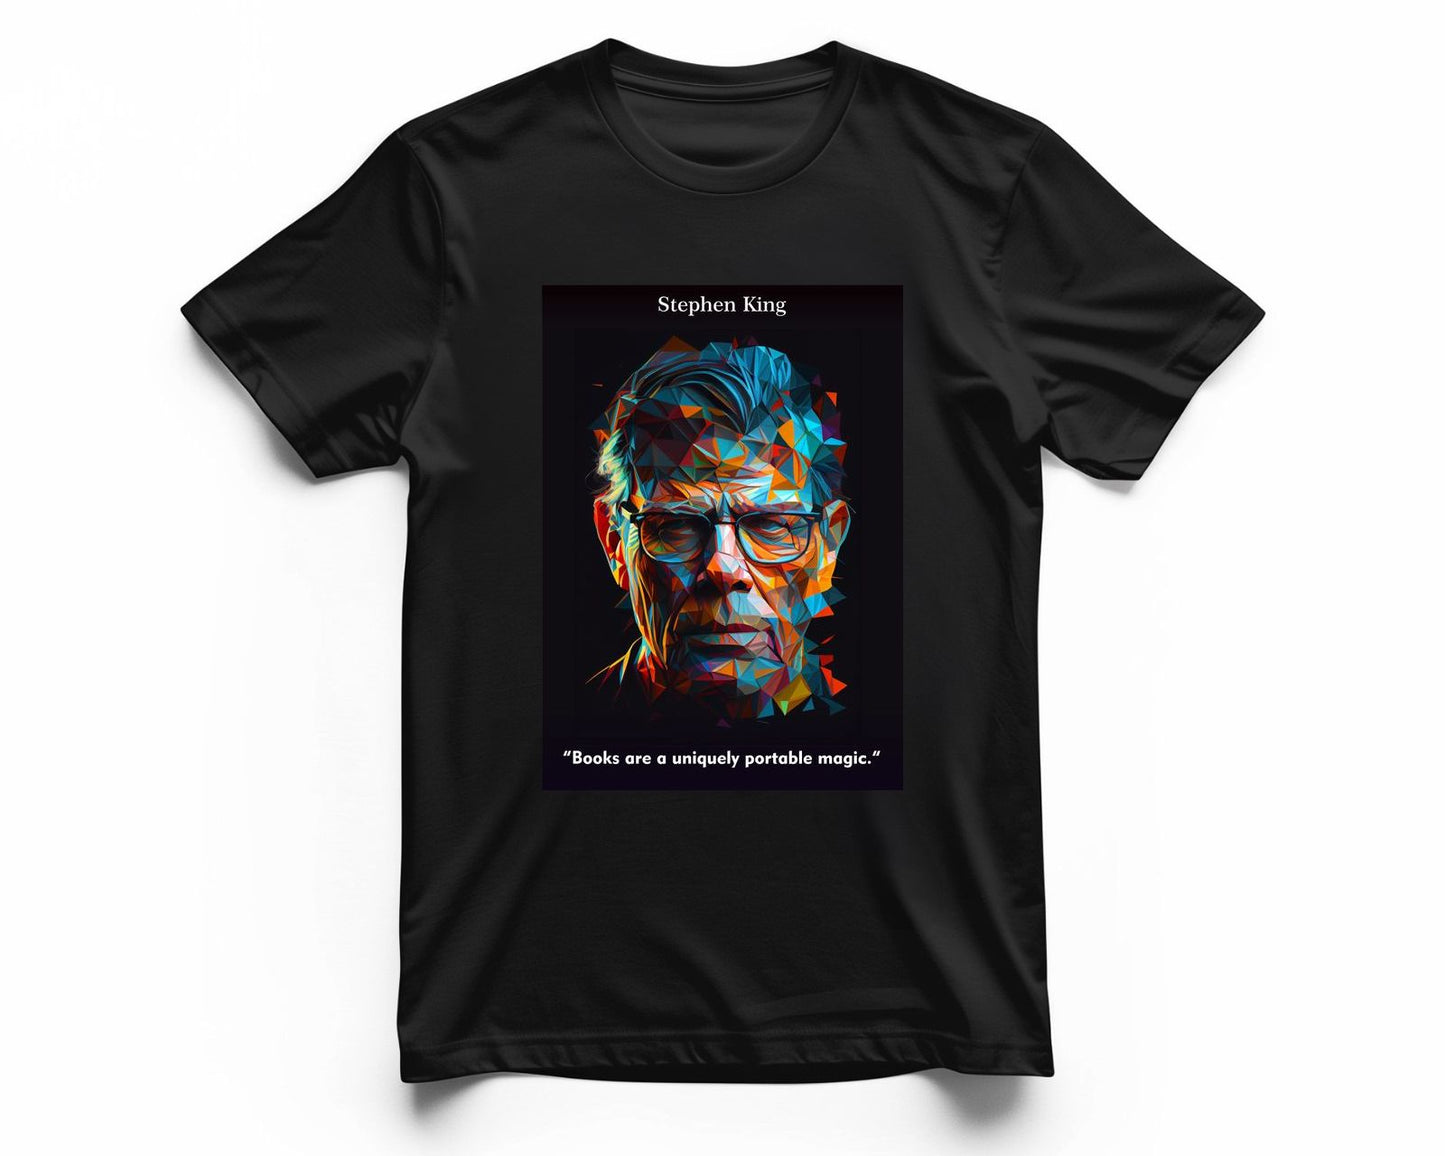 Stephen King Quotes - @WpapArtist